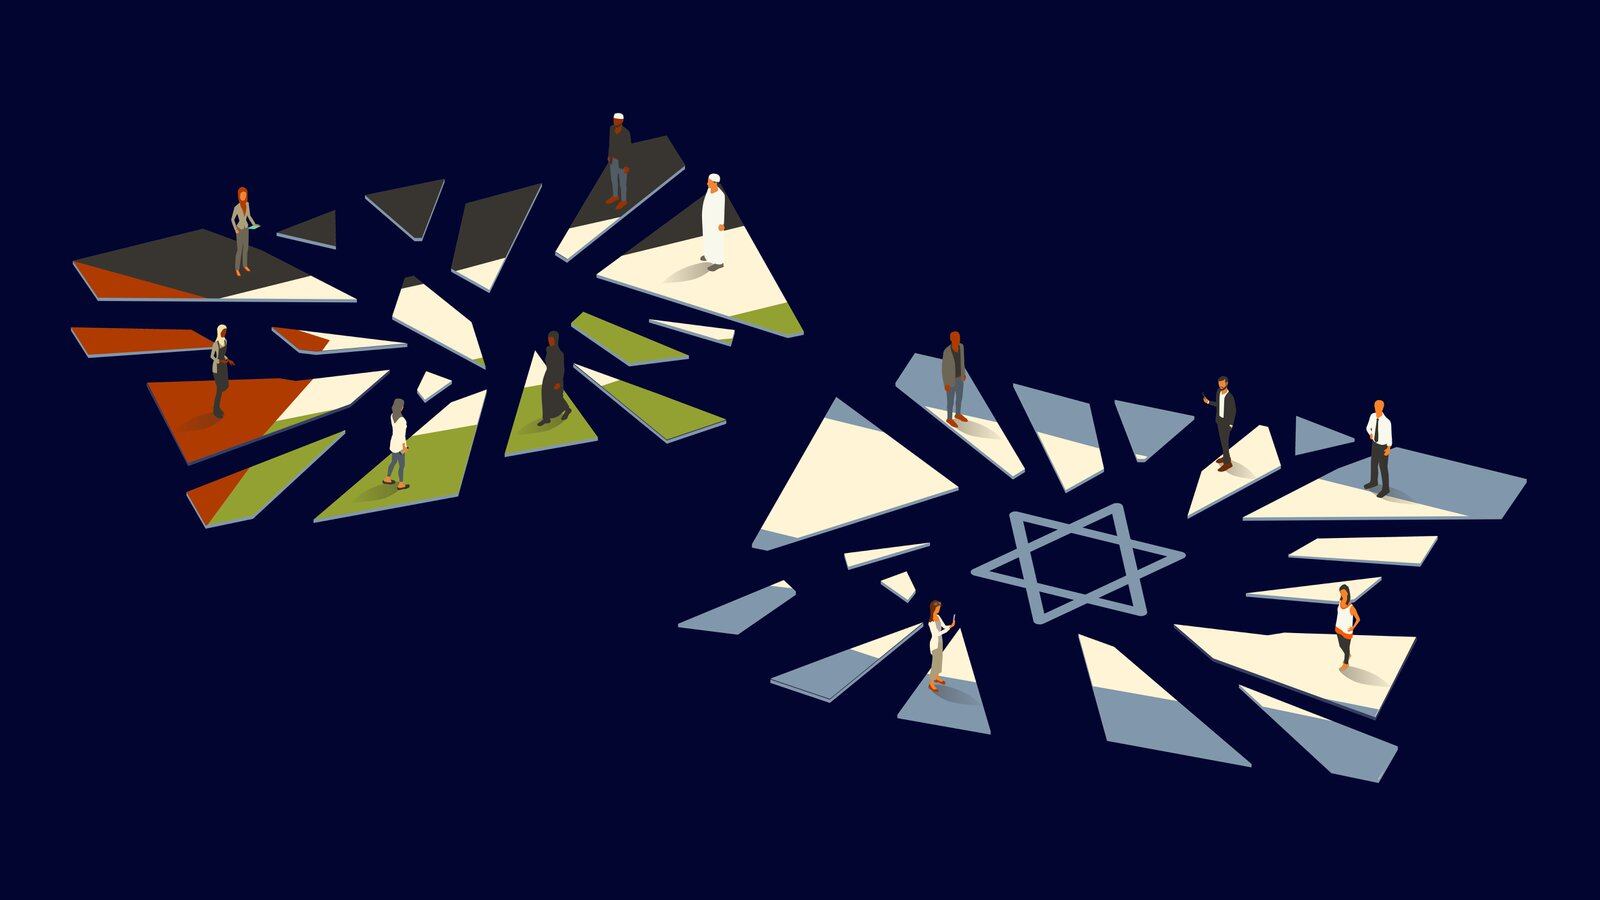 Illustration of people standing on the pieces of a shattered Israeli flag and Palestinian flag.